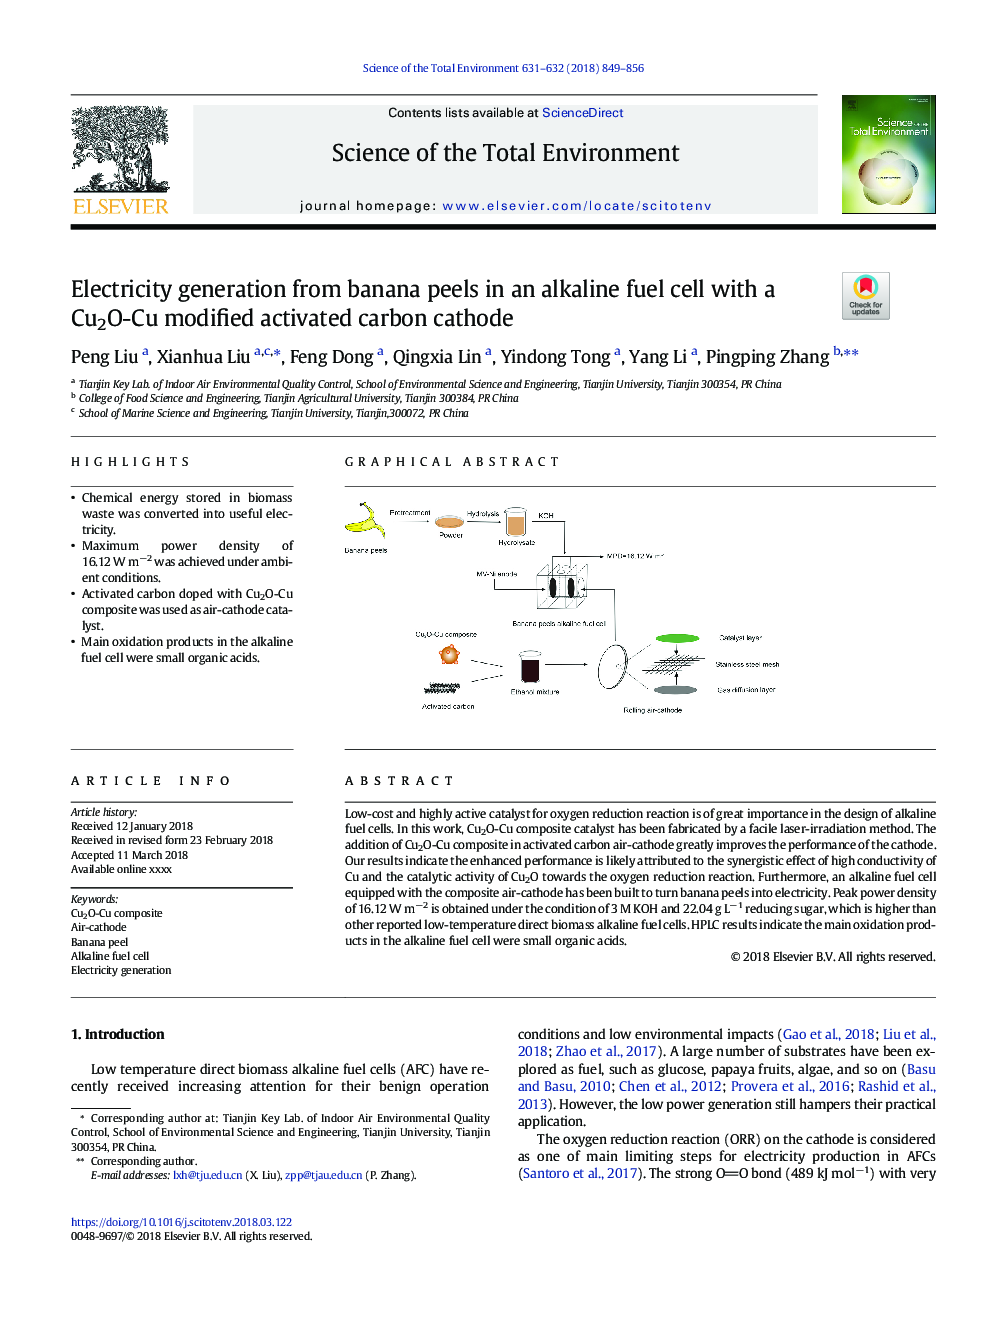 Electricity generation from banana peels in an alkaline fuel cell with a Cu2O-Cu modified activated carbon cathode